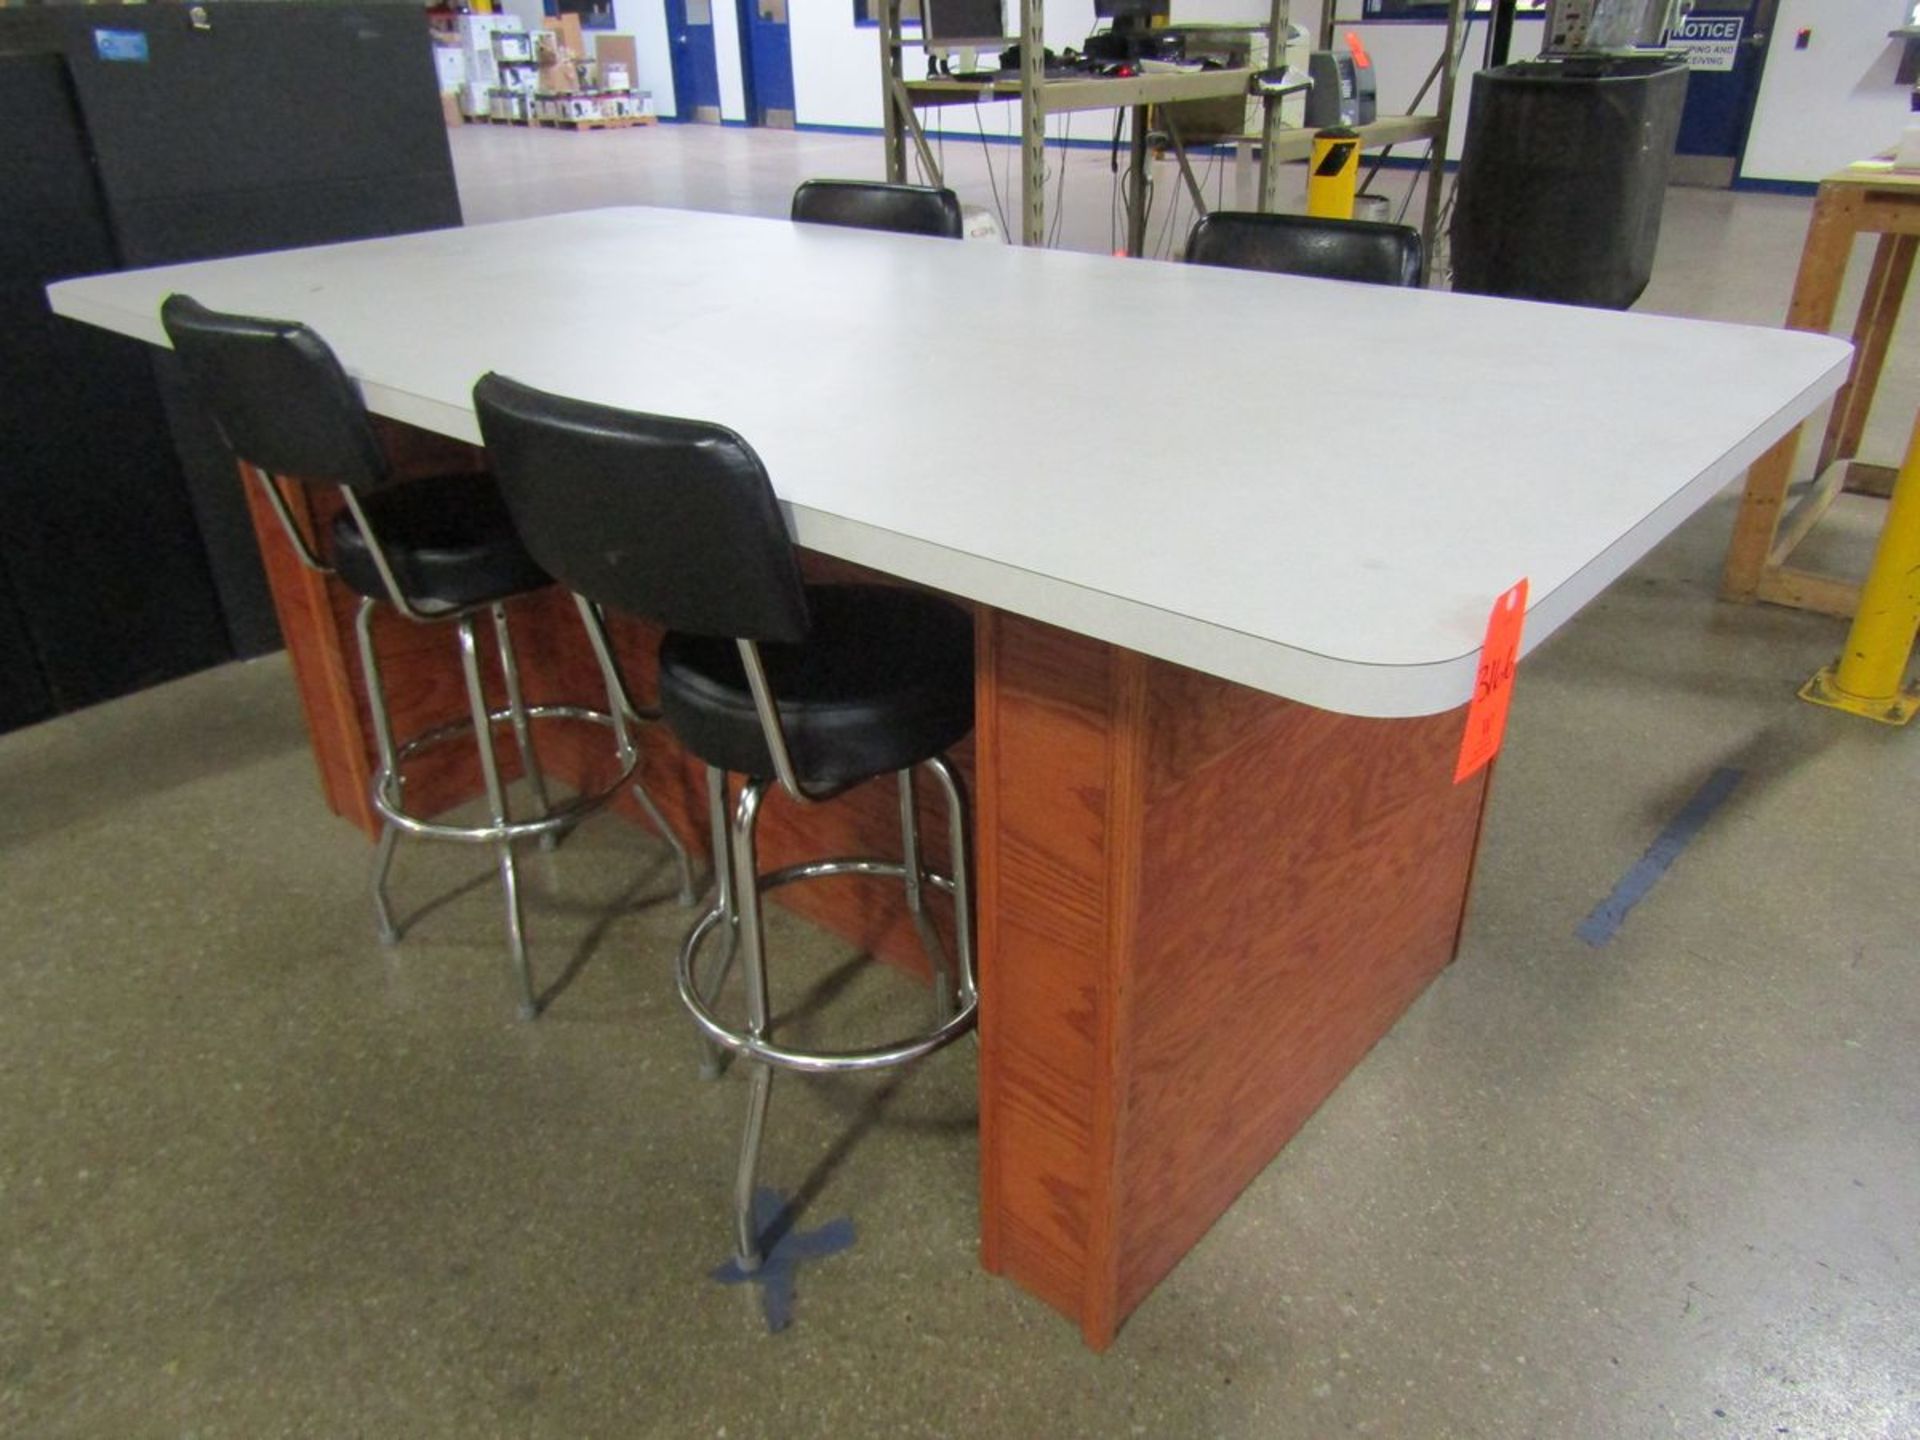 Lot - Shop Furniture, to Include: (1) Wooden Work Station with Laminate Top, 96 in. x 48 in. x 39